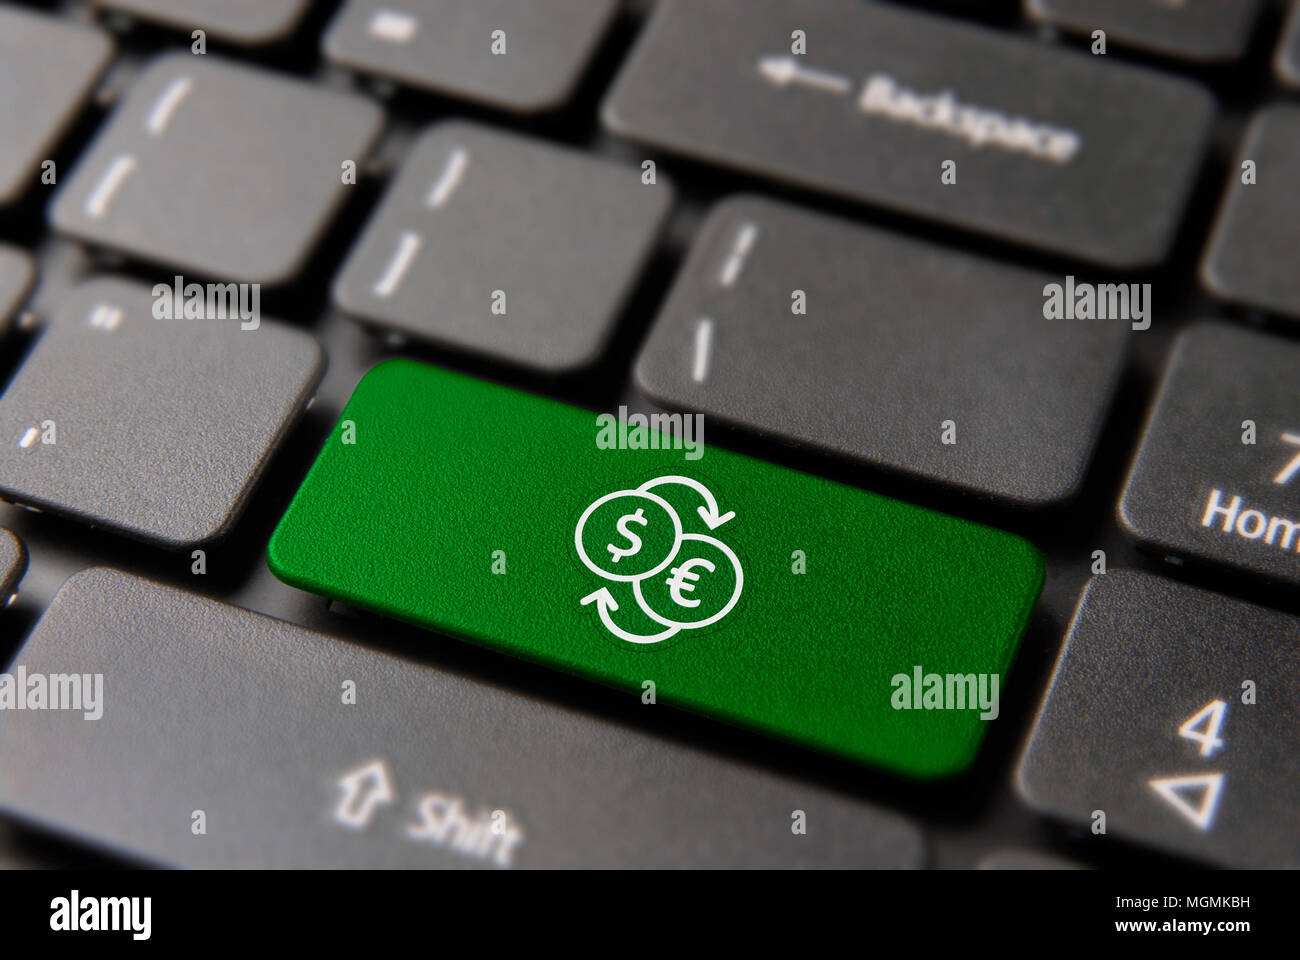 Online currency exchange concept: green key button with dollar conversion to euro icon on laptop keyboard. Stock Photo